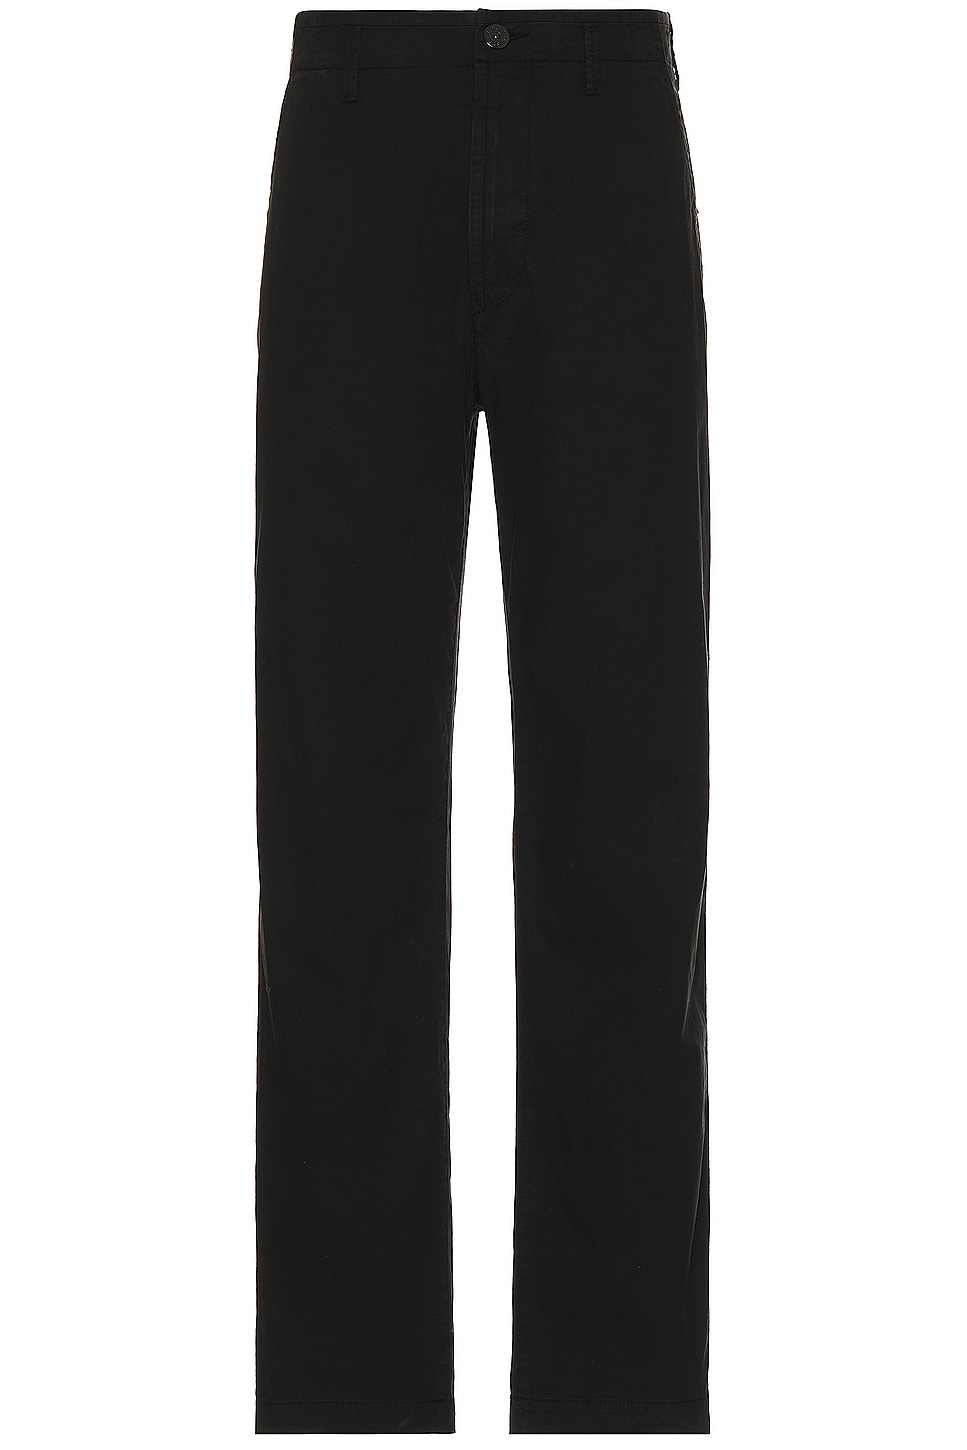 Image 1 of Stone Island Chino Pants in Black